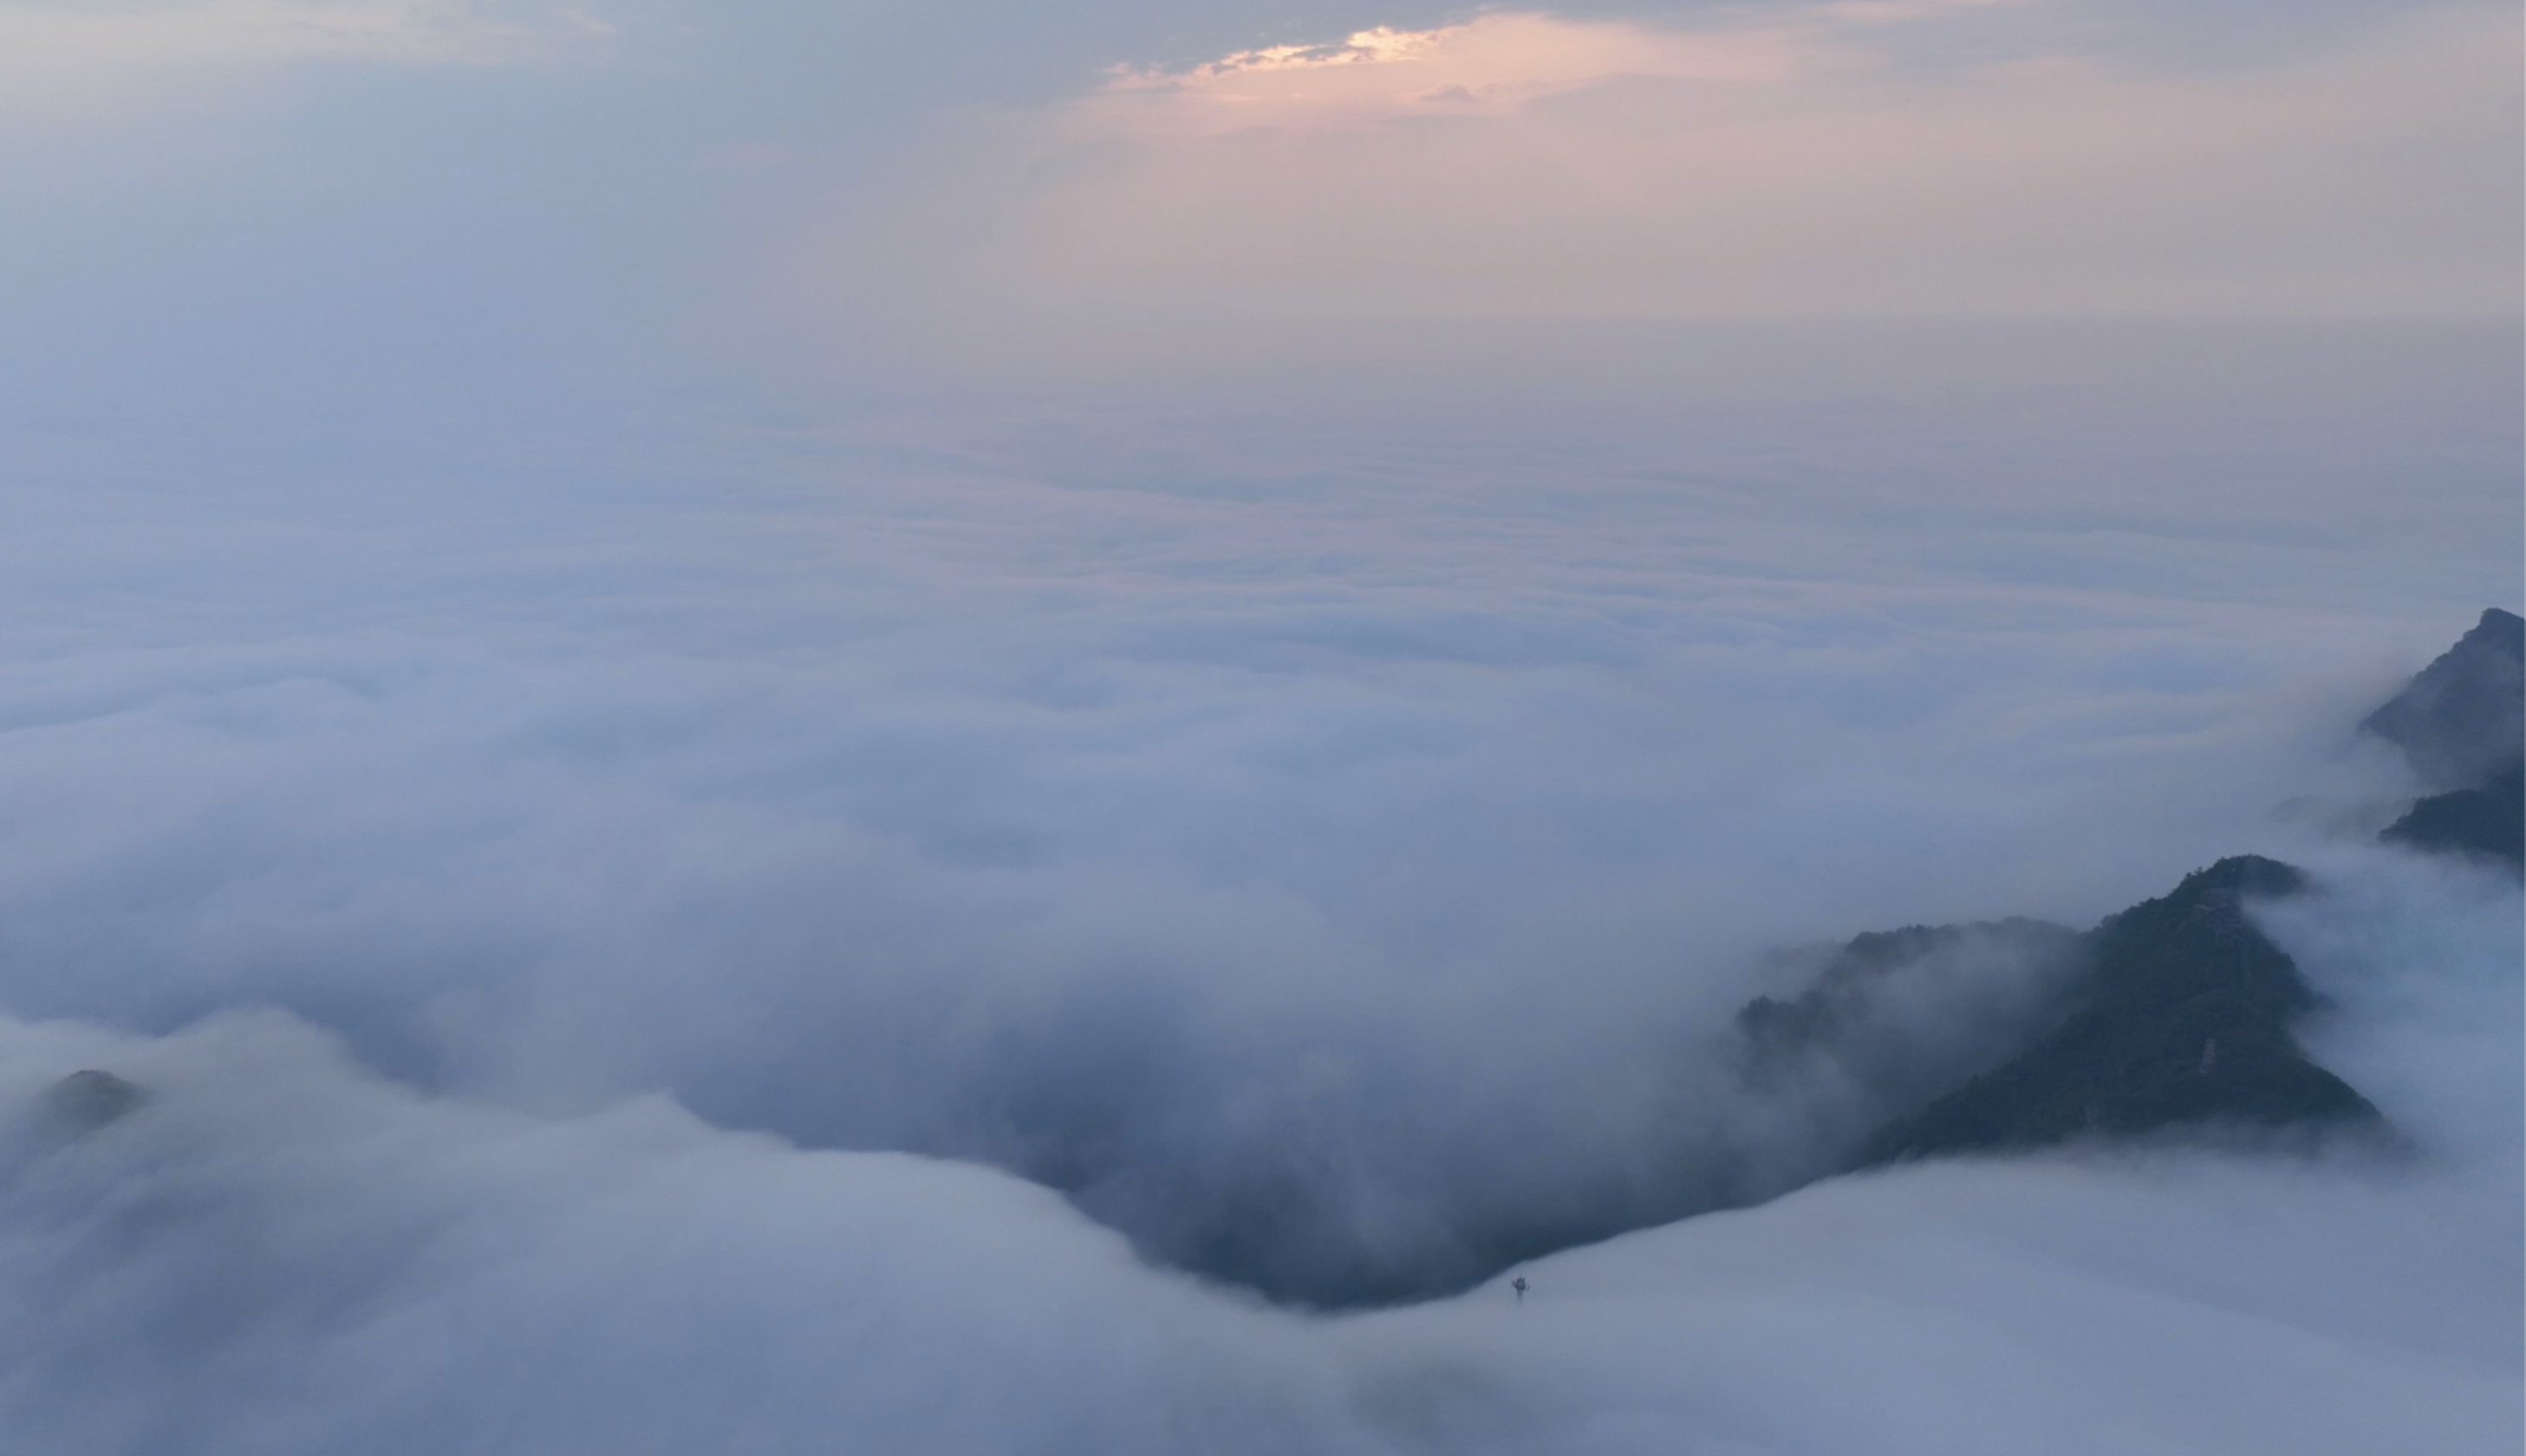 Magnificent sea of clouds settles over mountains in central China